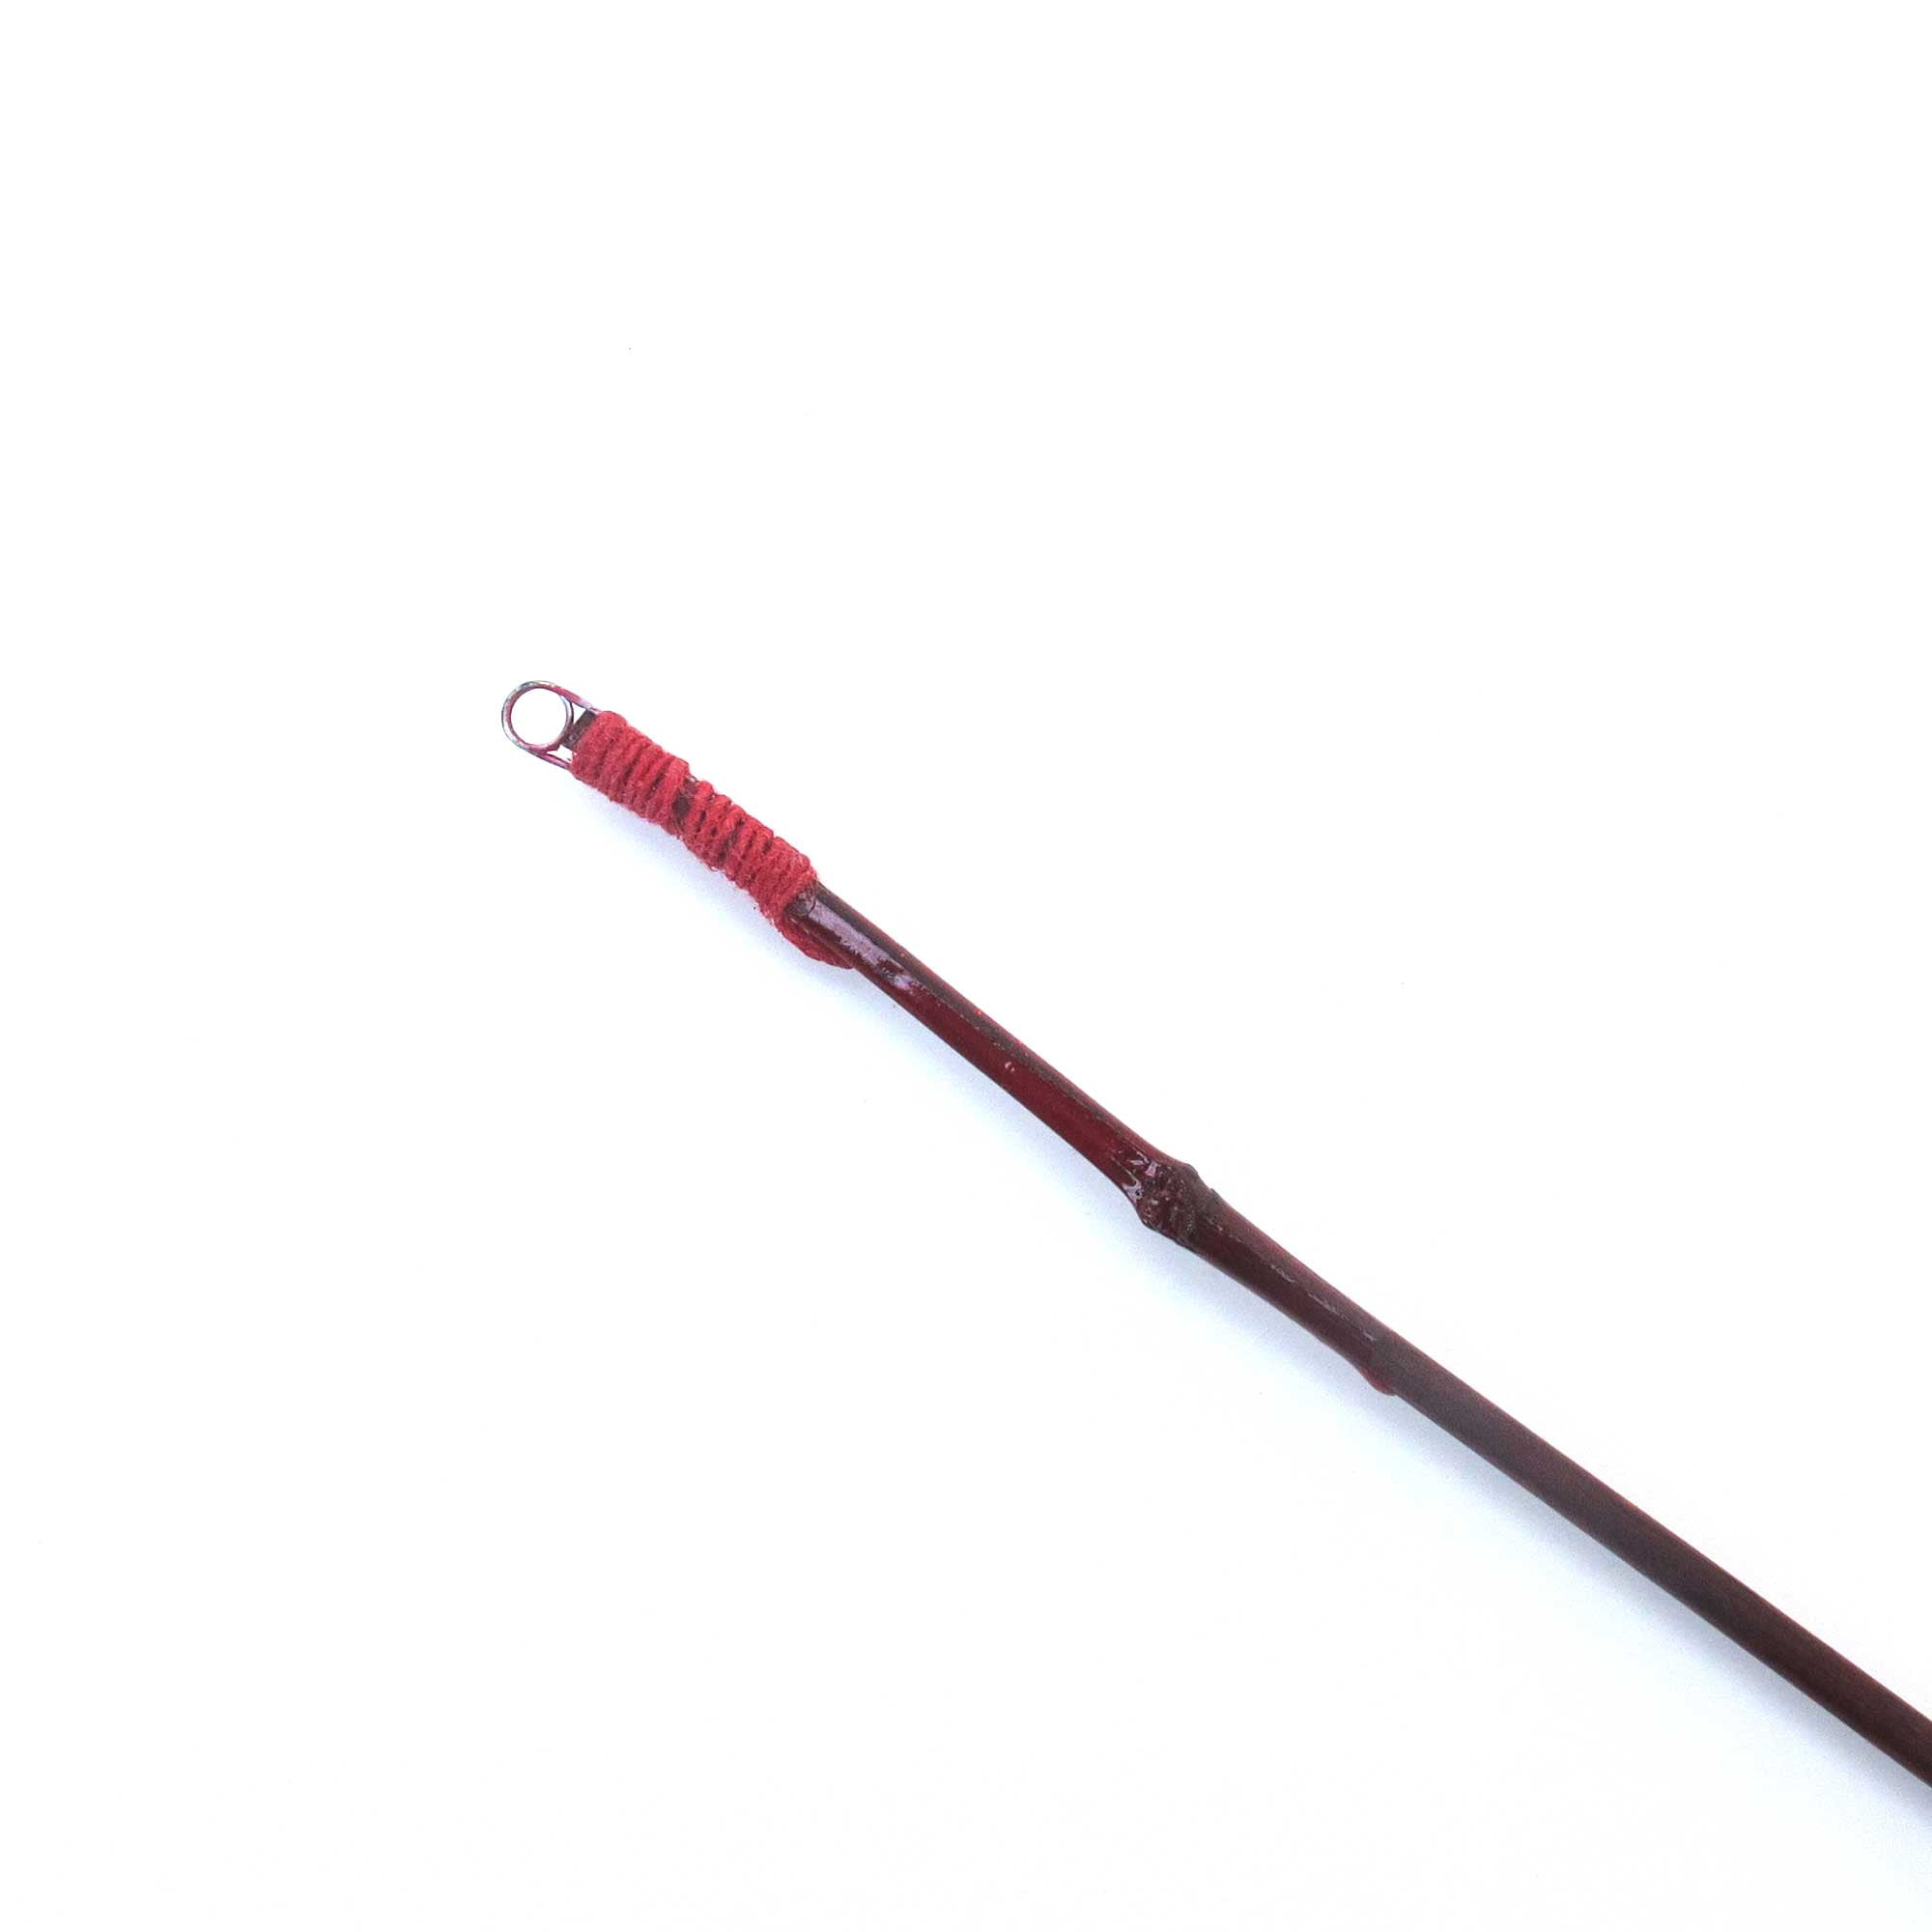 BambooMN Bamboo Vintage Cane Fishing Pole with Bobber, Hook, Line and Sinker